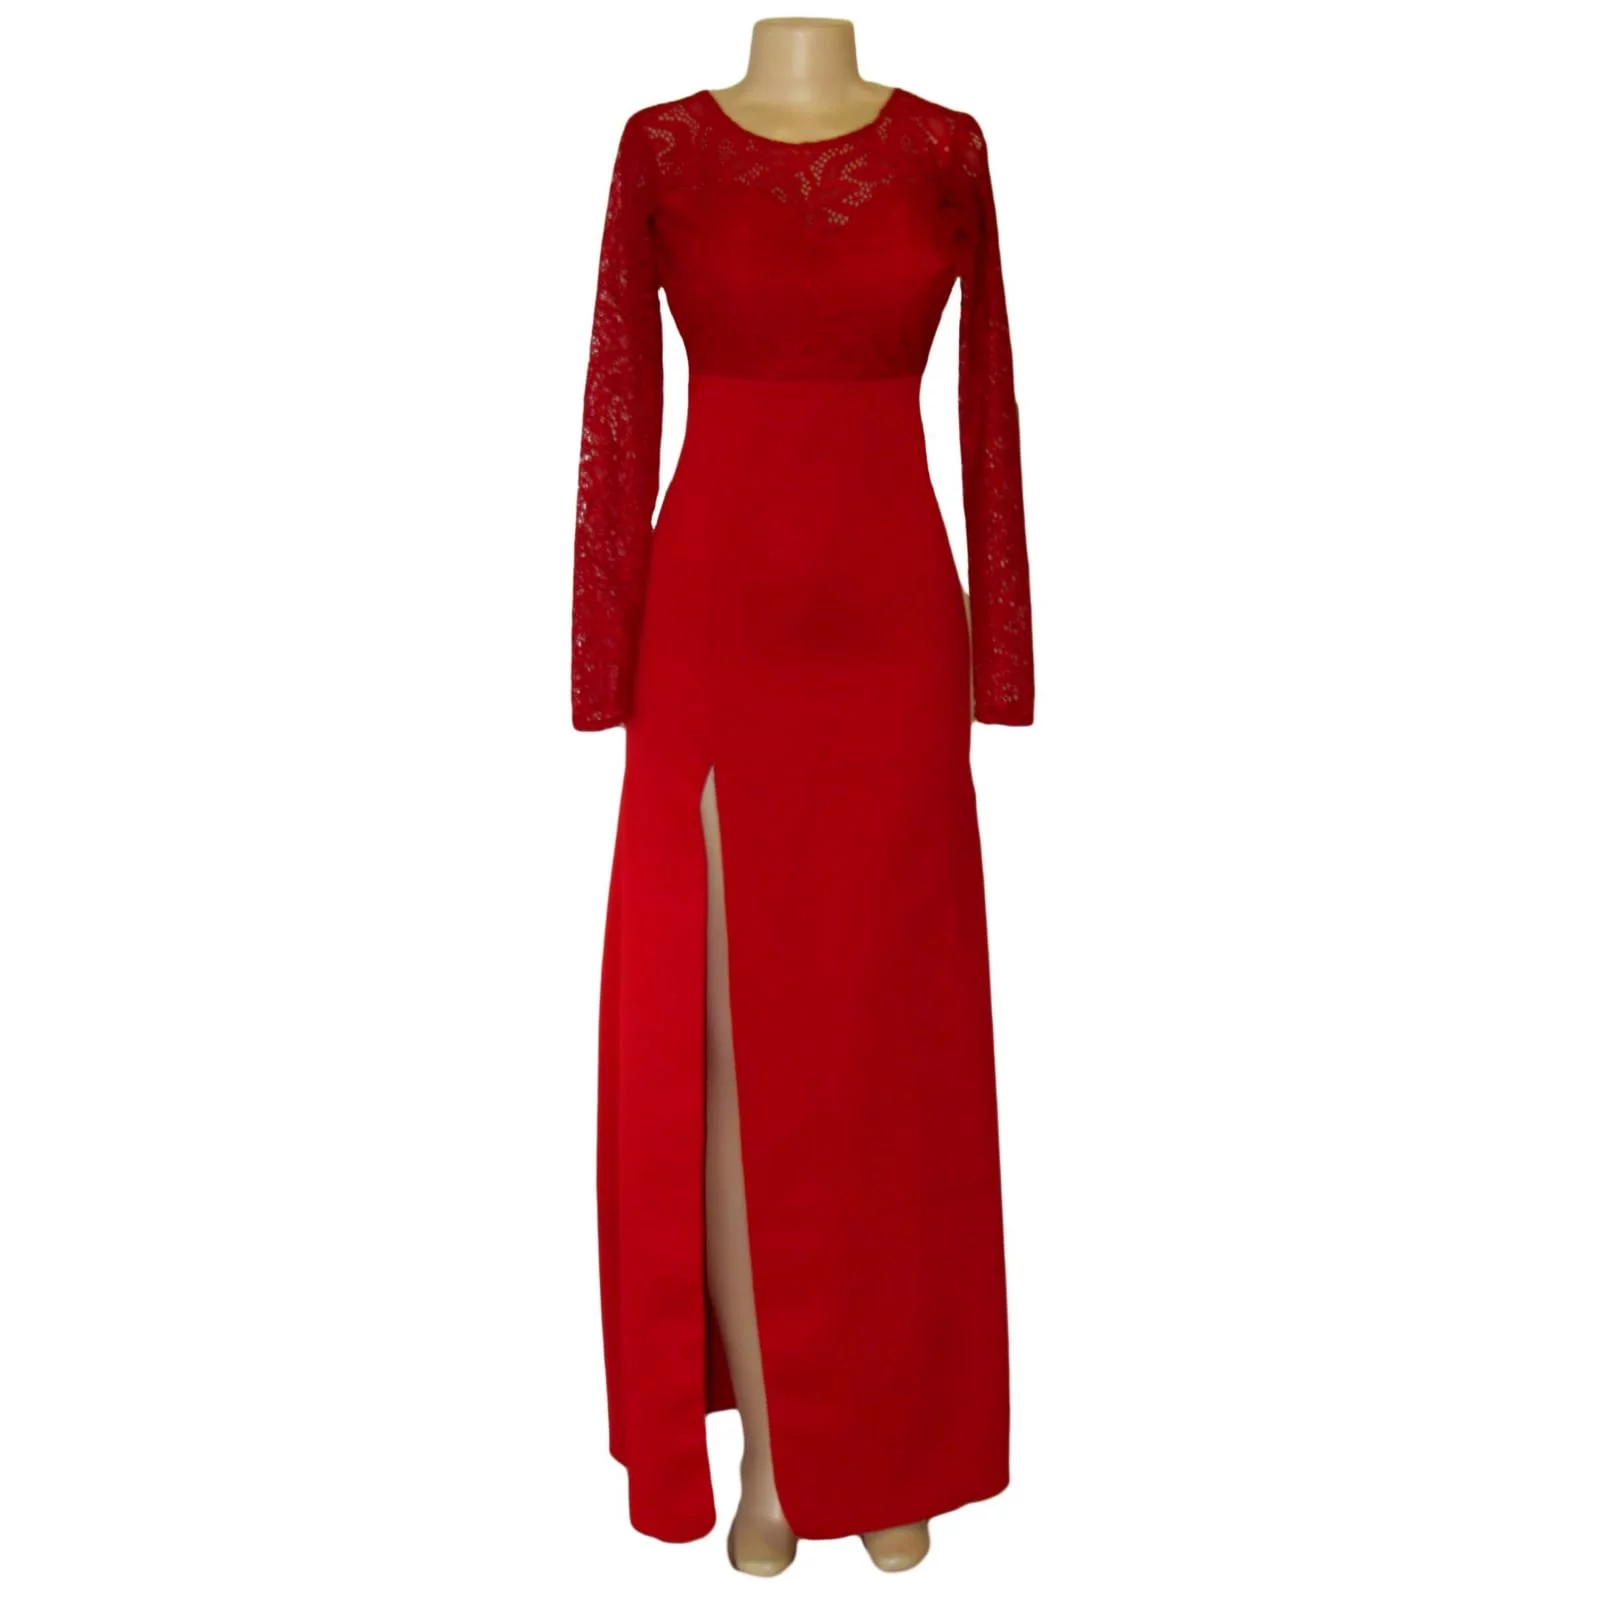 Straight cut deep red open back gala dress 7 straight cut deep red open back gala dress. With a lace bodice, long lace sleeves and a slit. With a detachable train.